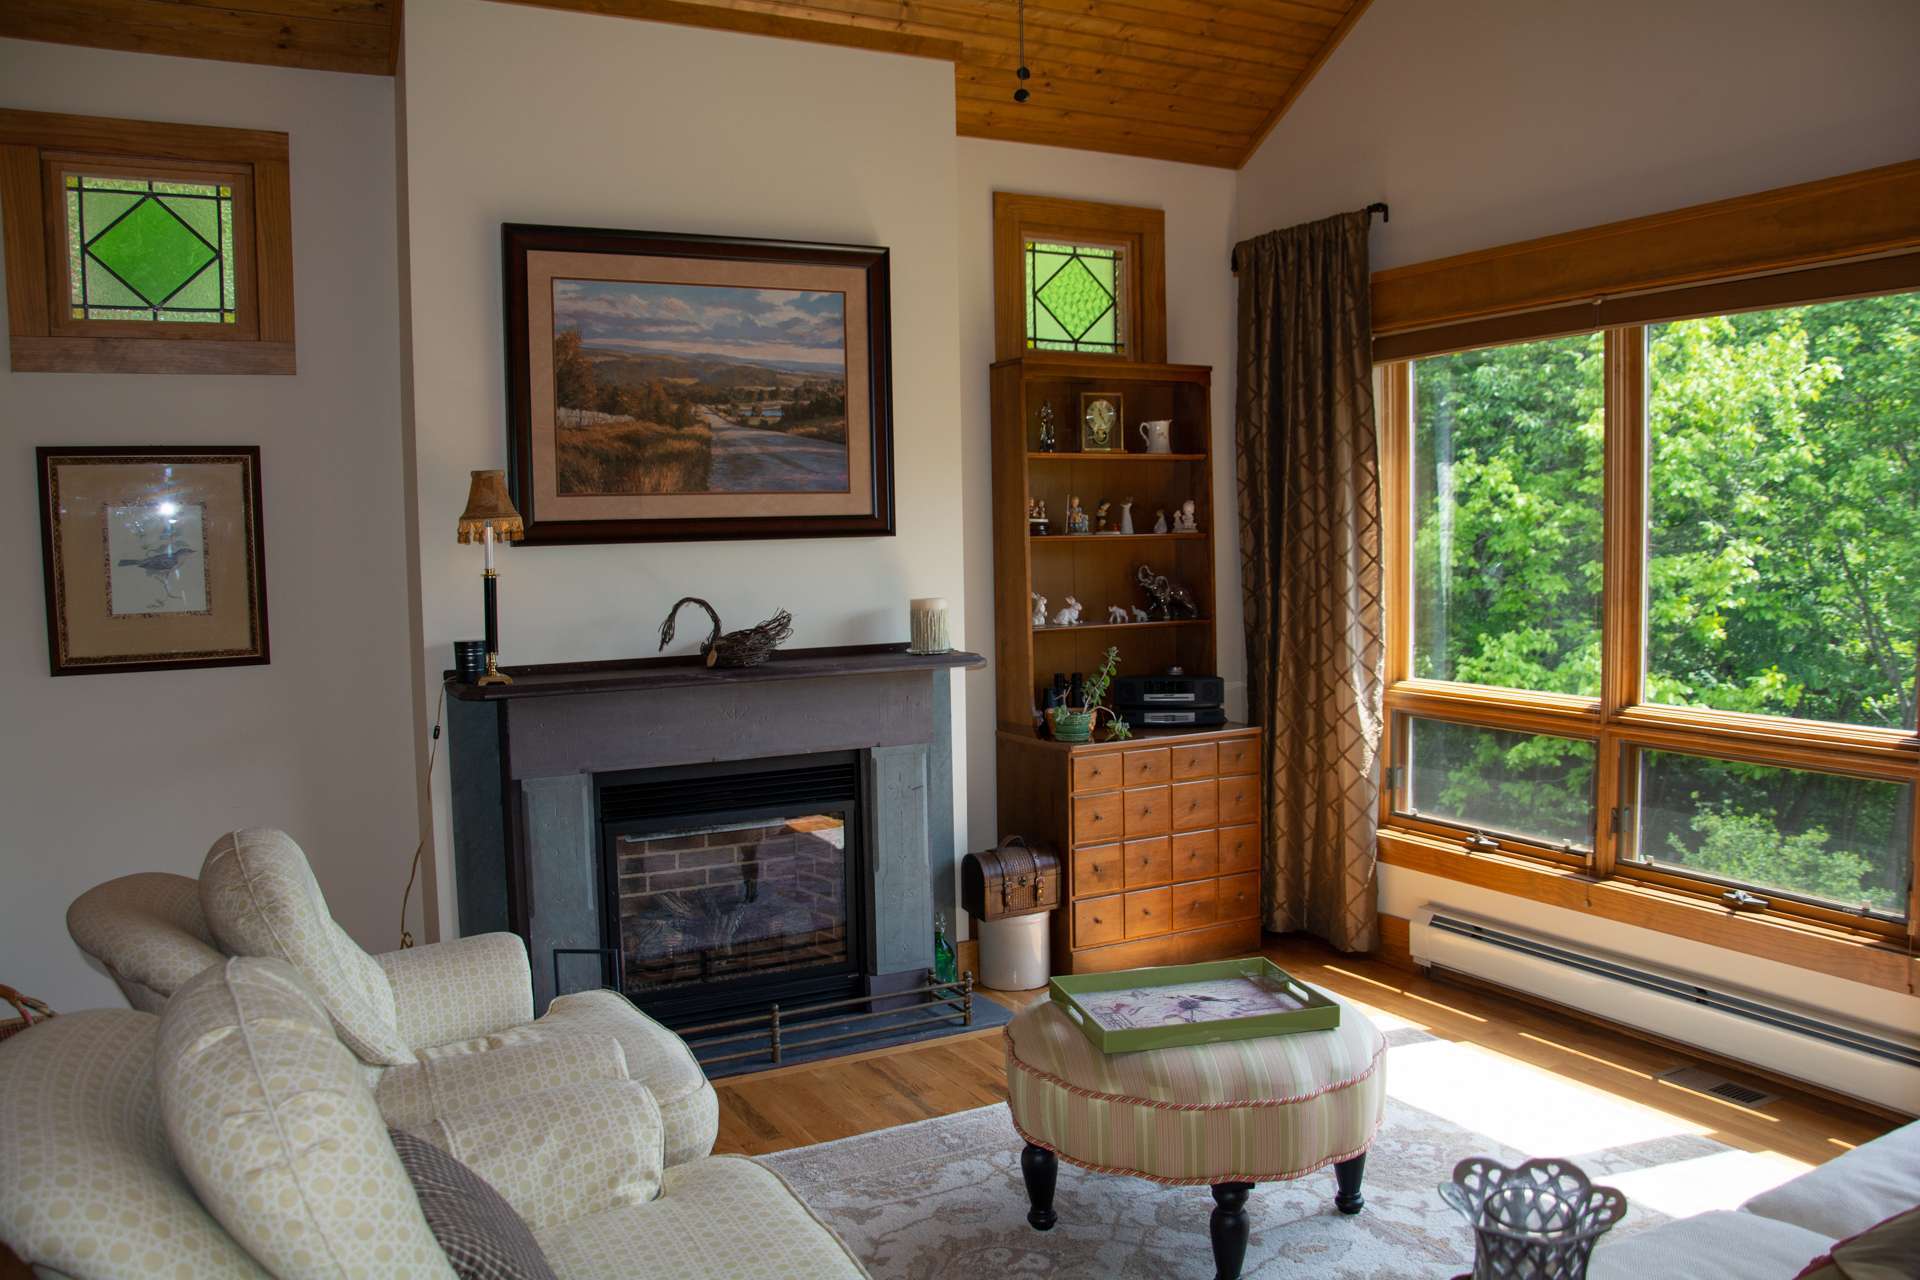 The morning room, with lots of windows and a gas log fireplace, is a great spot for relaxing with the morning news and a cup of coffee.